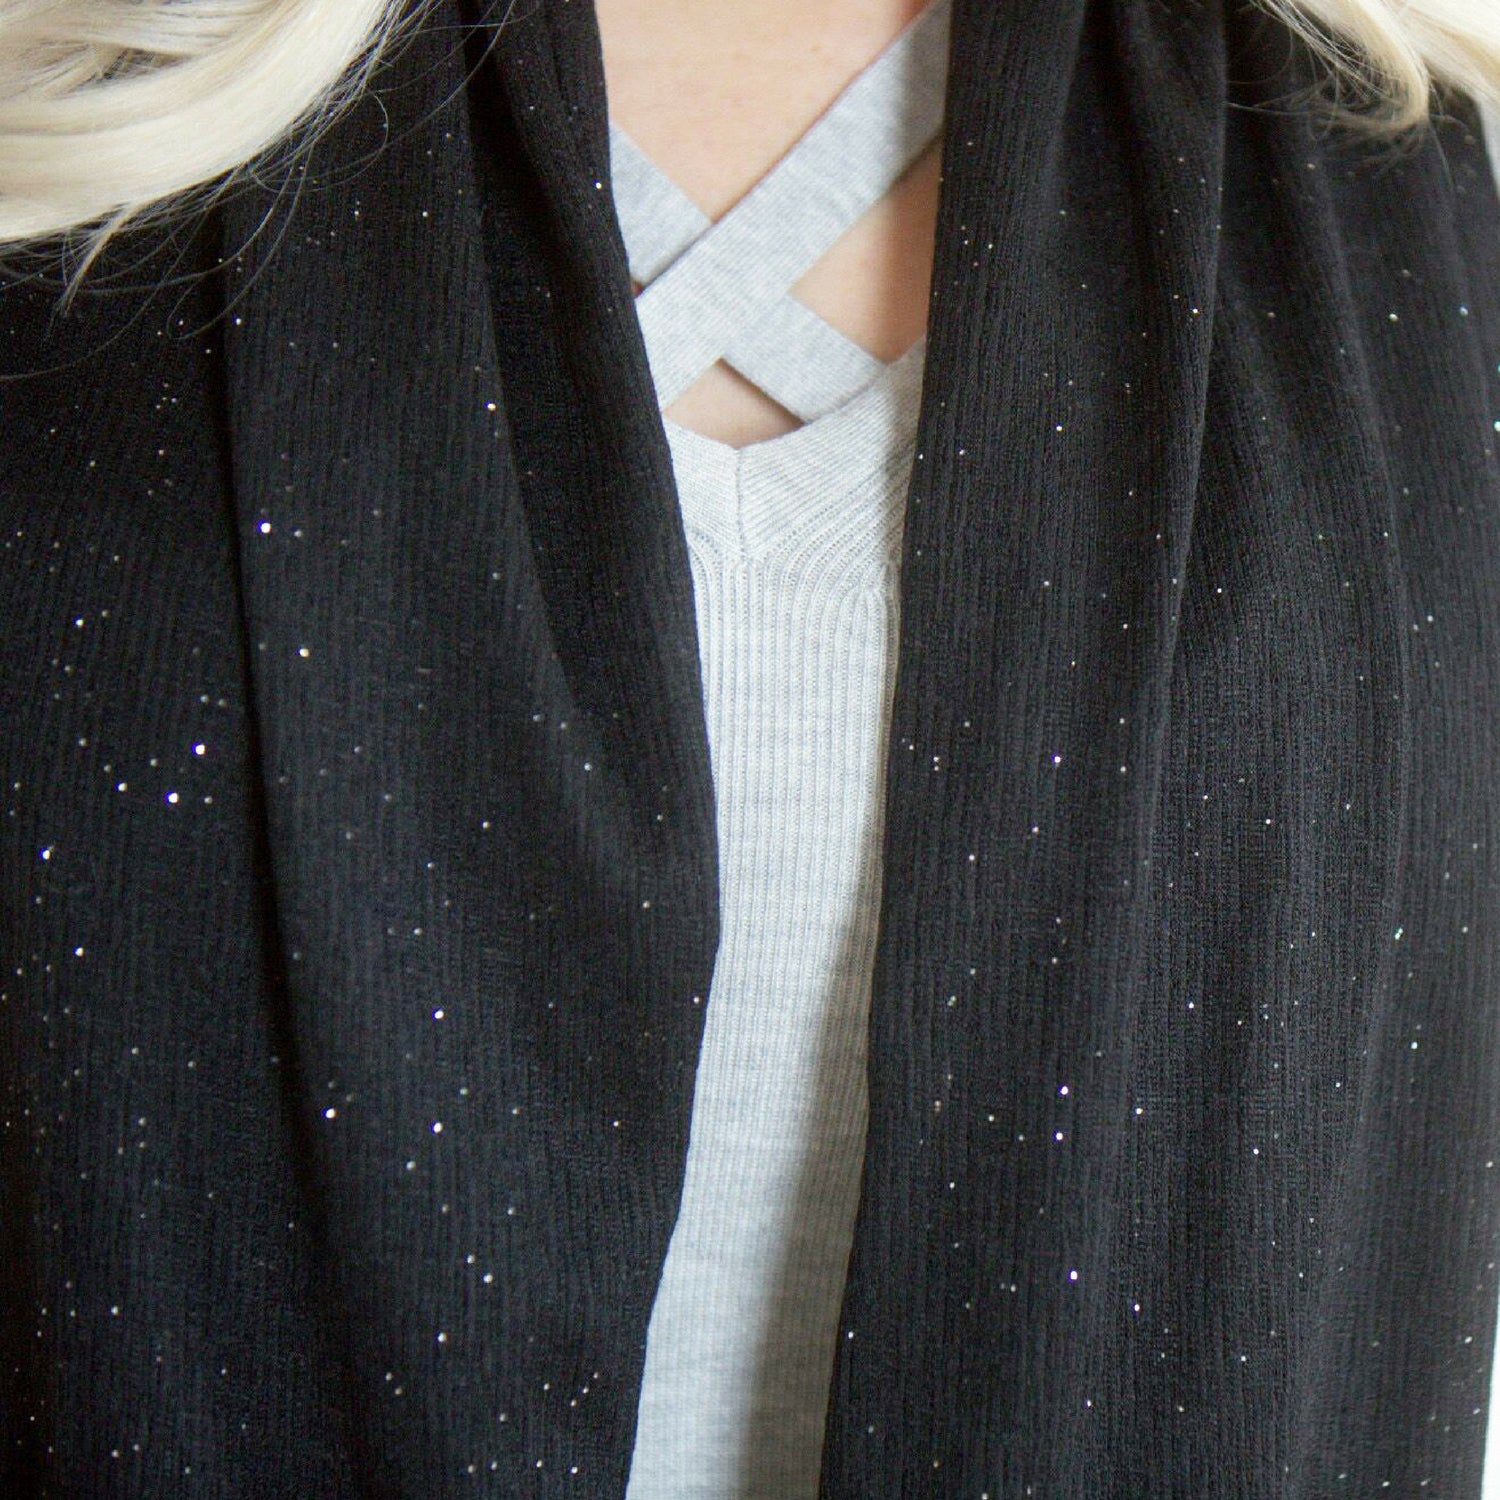 SHOLDIT Infinity Scarf with Pocket Shimmer Black Fabric Close Up